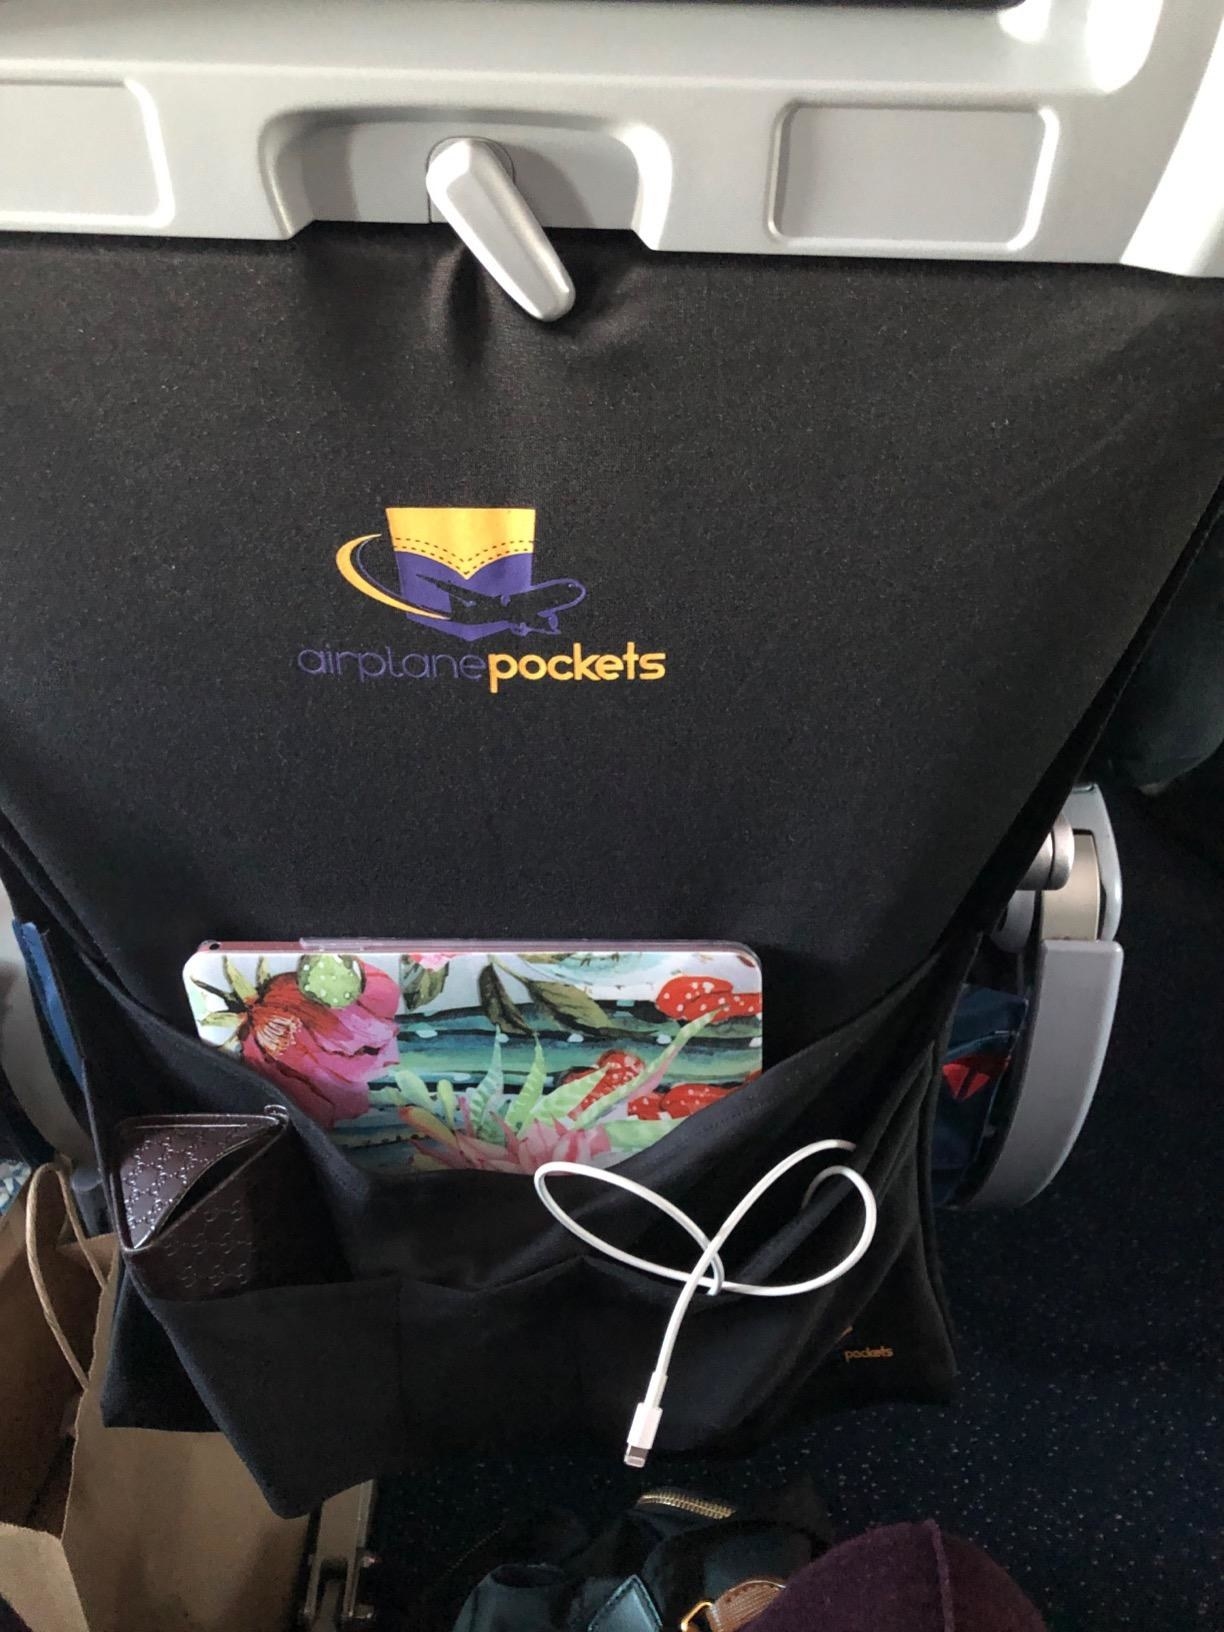 Airplane Pockets - Sanitary Tray + Table Cover With Pockets For